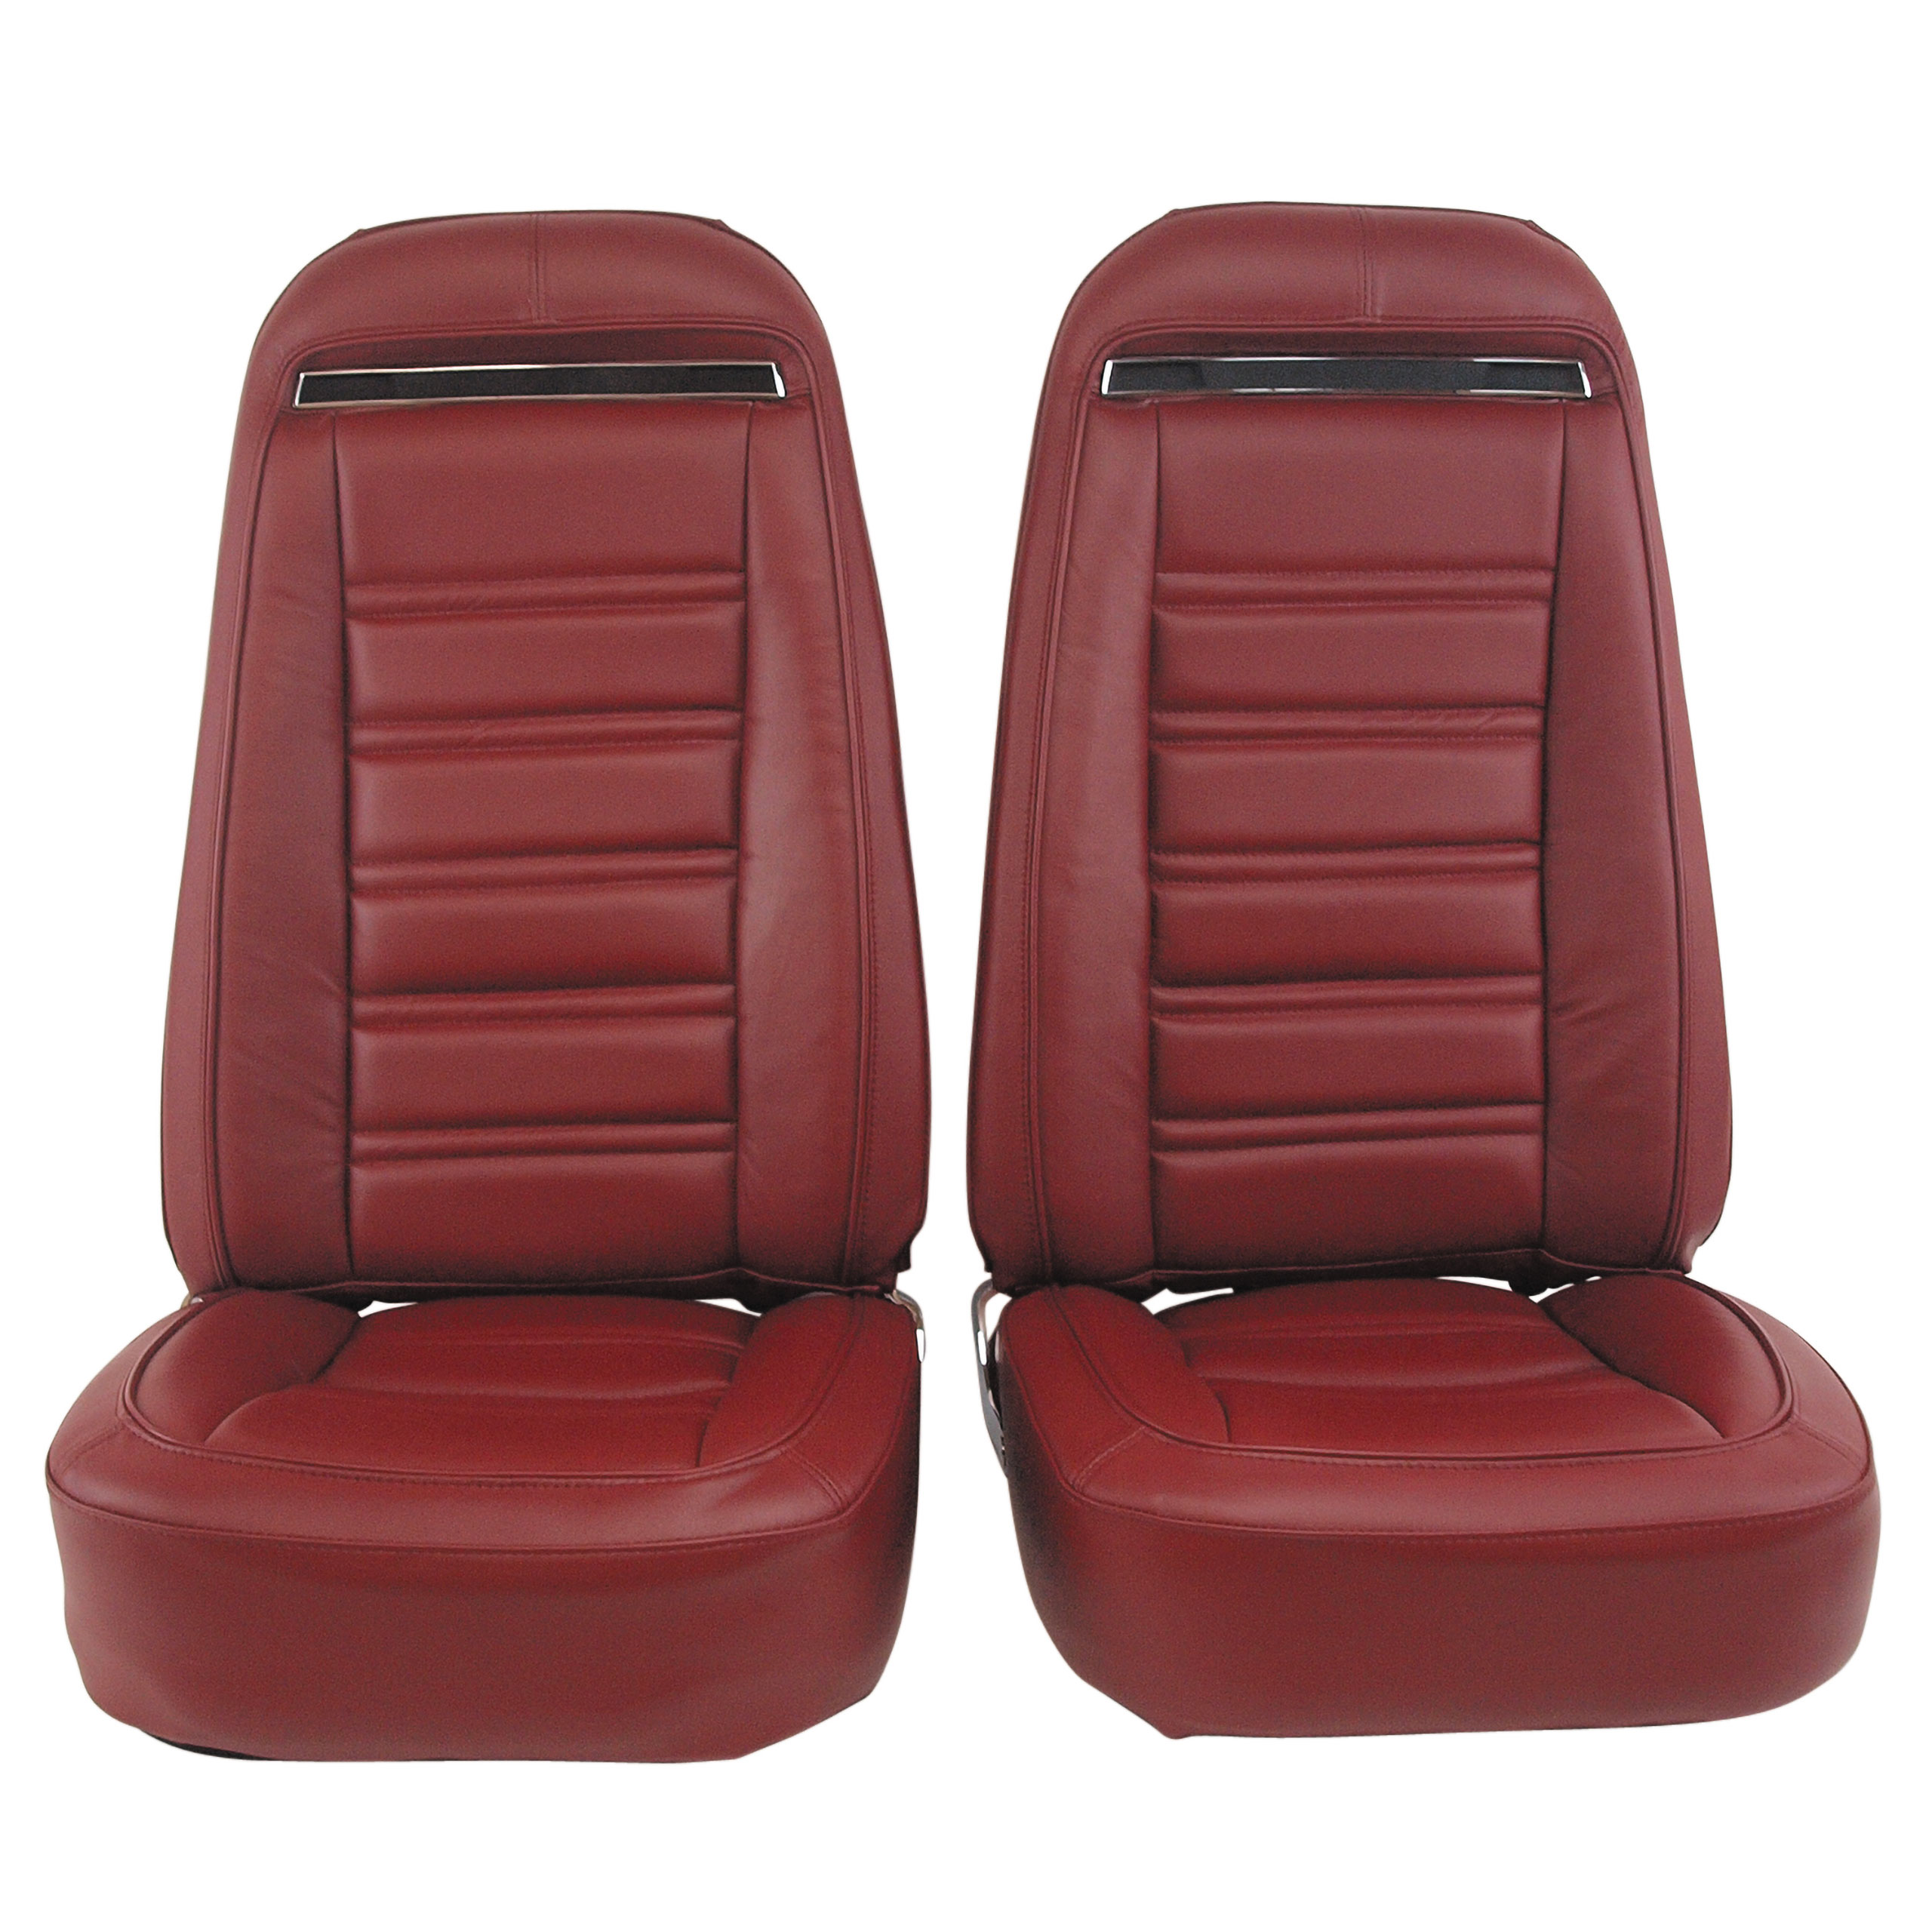 1975 C3 Corvette Mounted Seats Oxblood 100% Leather Without Shoulder Harness